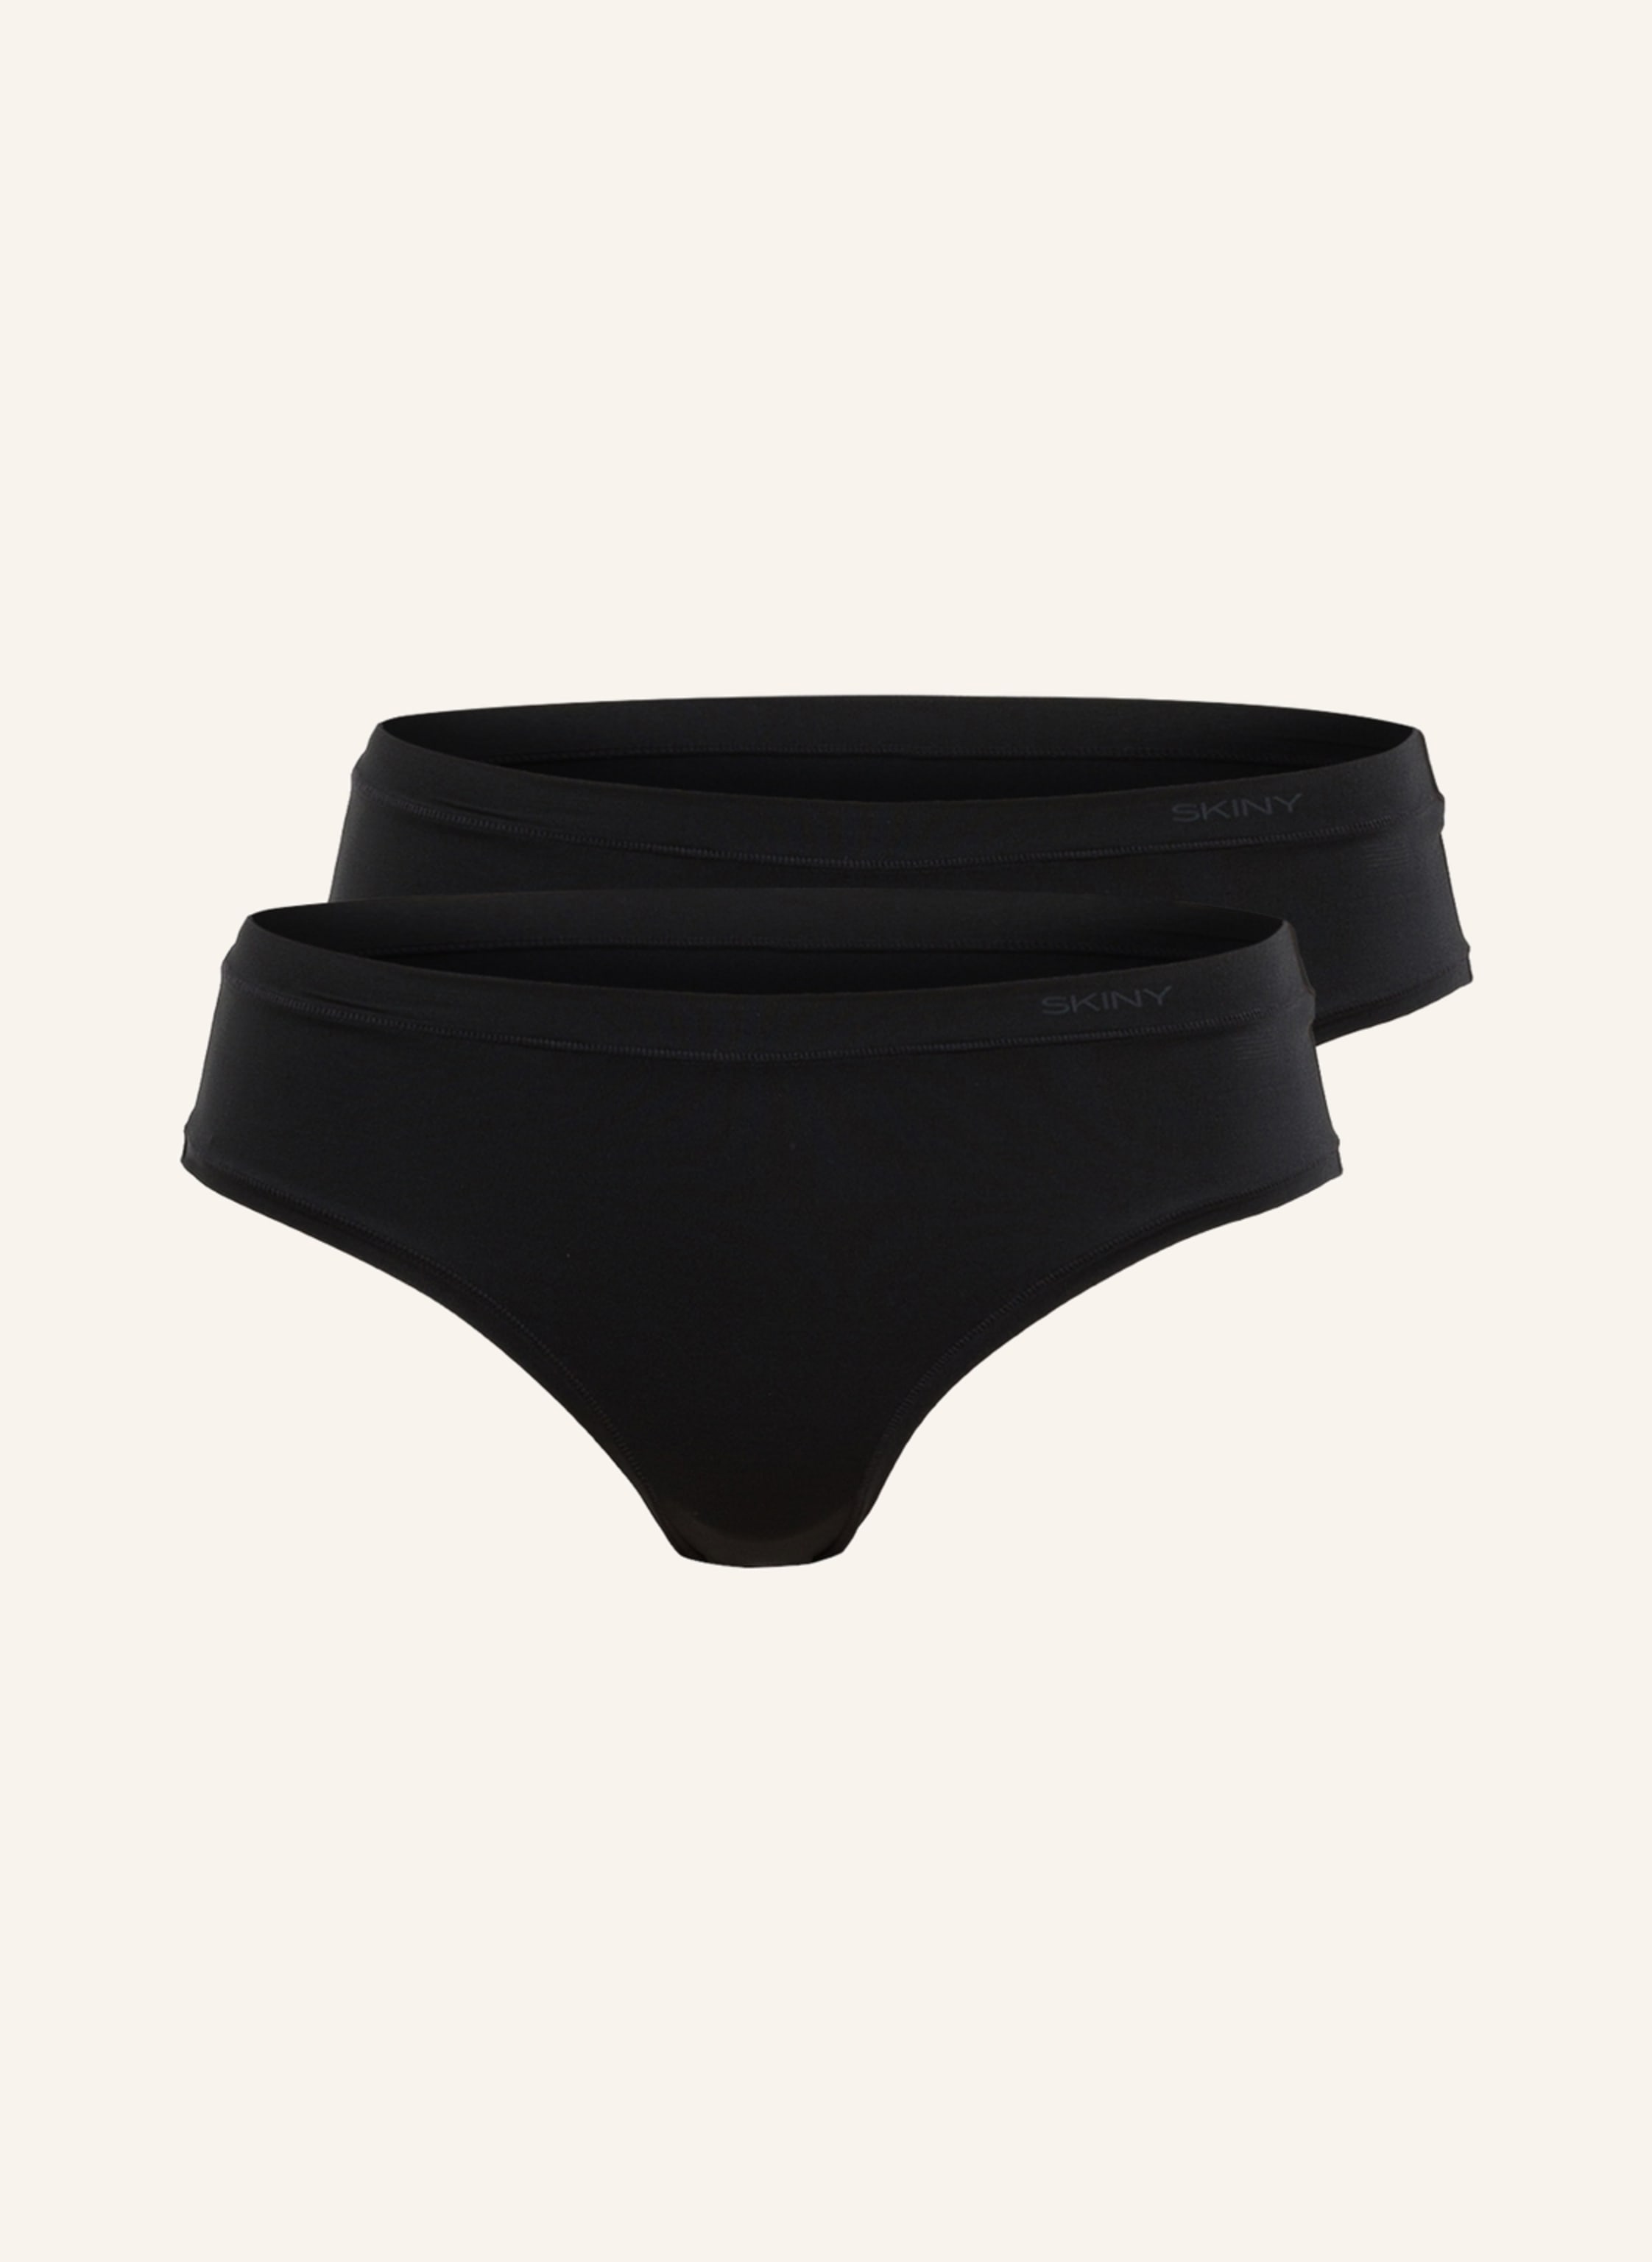 Skiny 2 pack of briefs PURE NUDITY in black